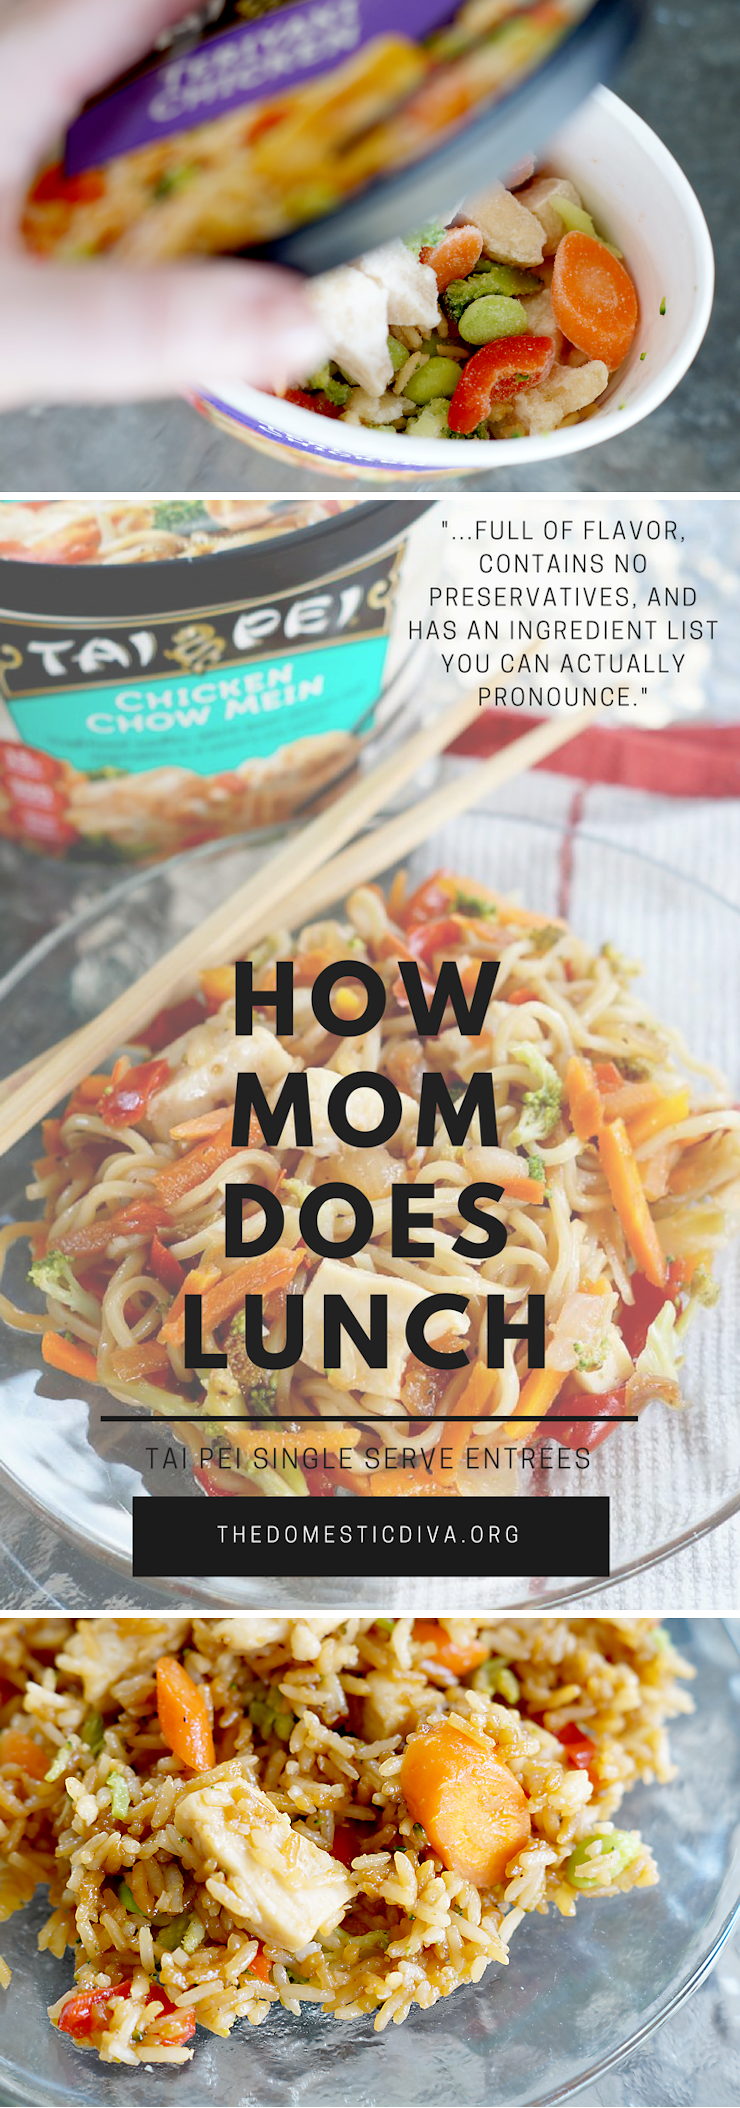 How Mom Does Lunch with Tai Pei Frozen Single Serve Entrees (review plus giveaway) #homeschool #mom #lunch #quicklunchideas